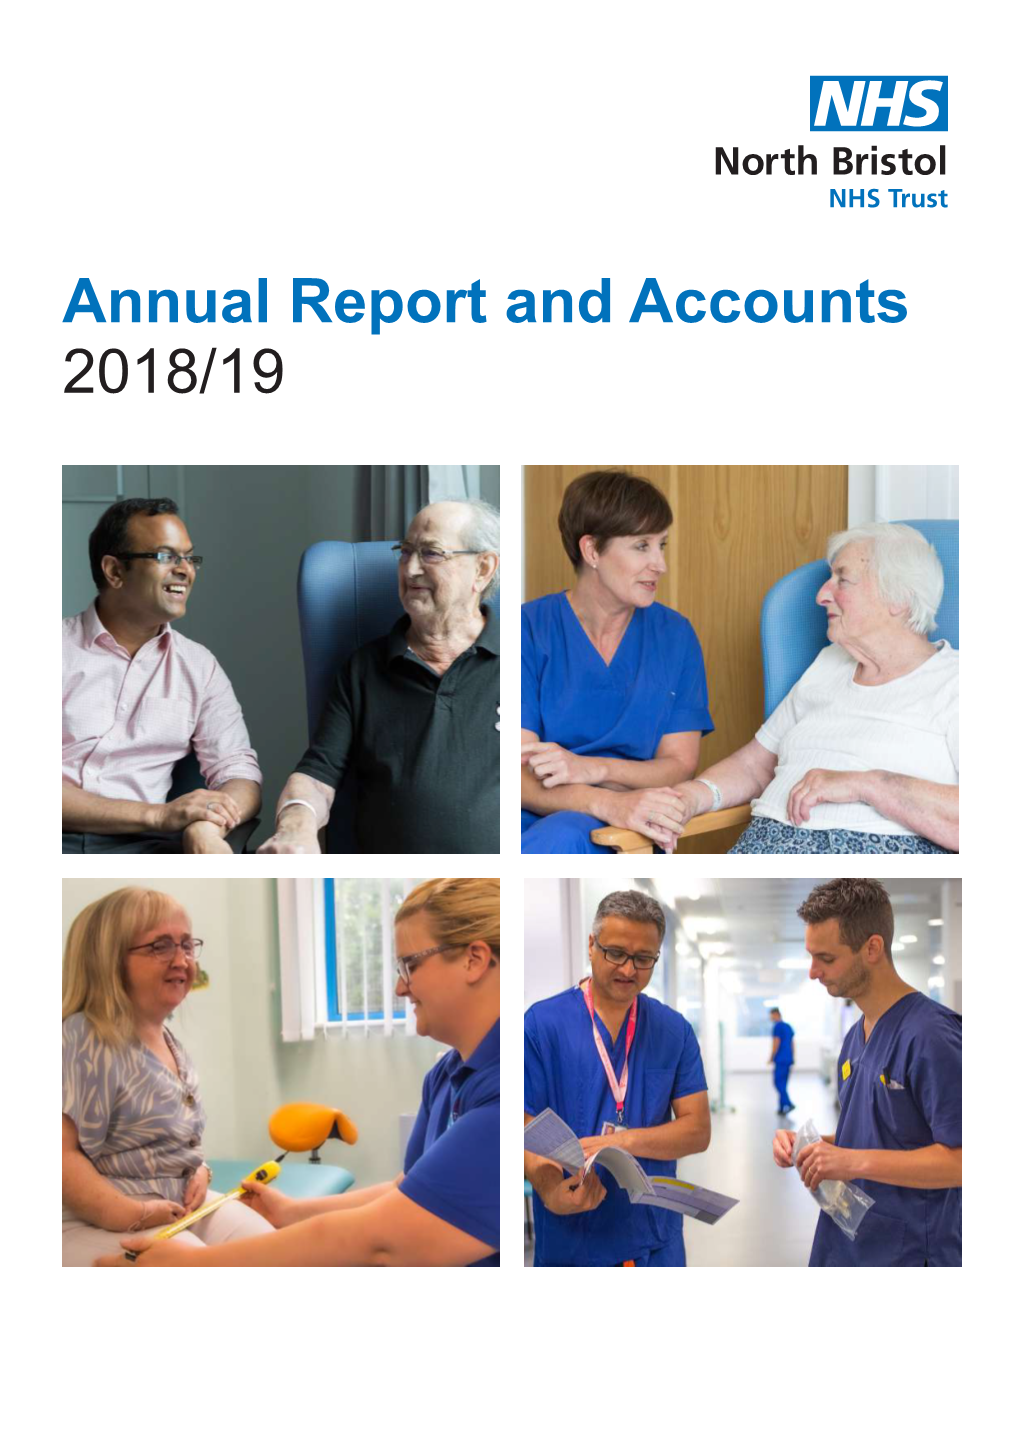 North Bristol NHS Trust: Annual Report and Accounts 2018/19